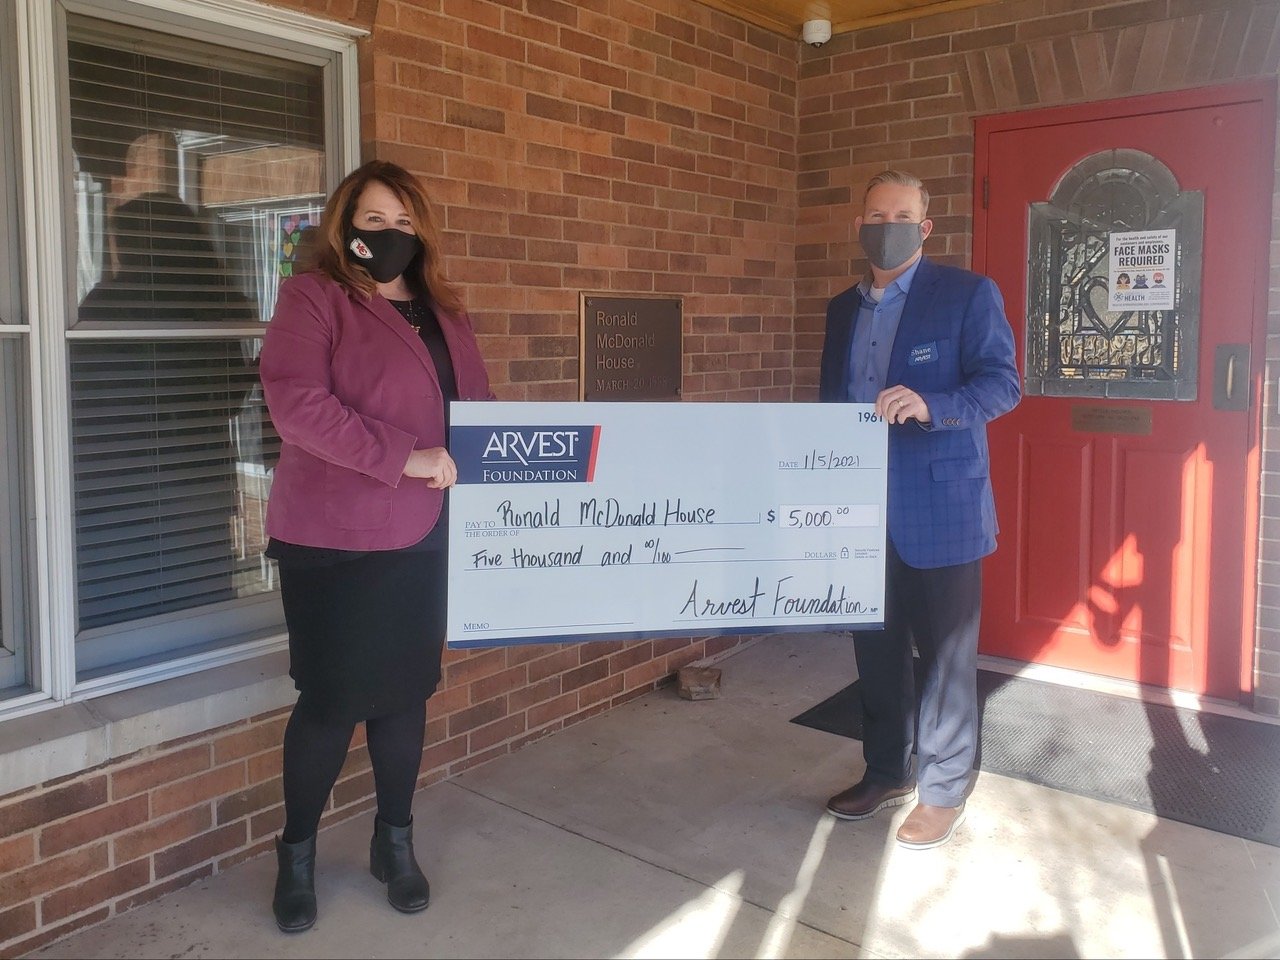 Ronald McDonald House Charities of the Ozarks receives $5,000.